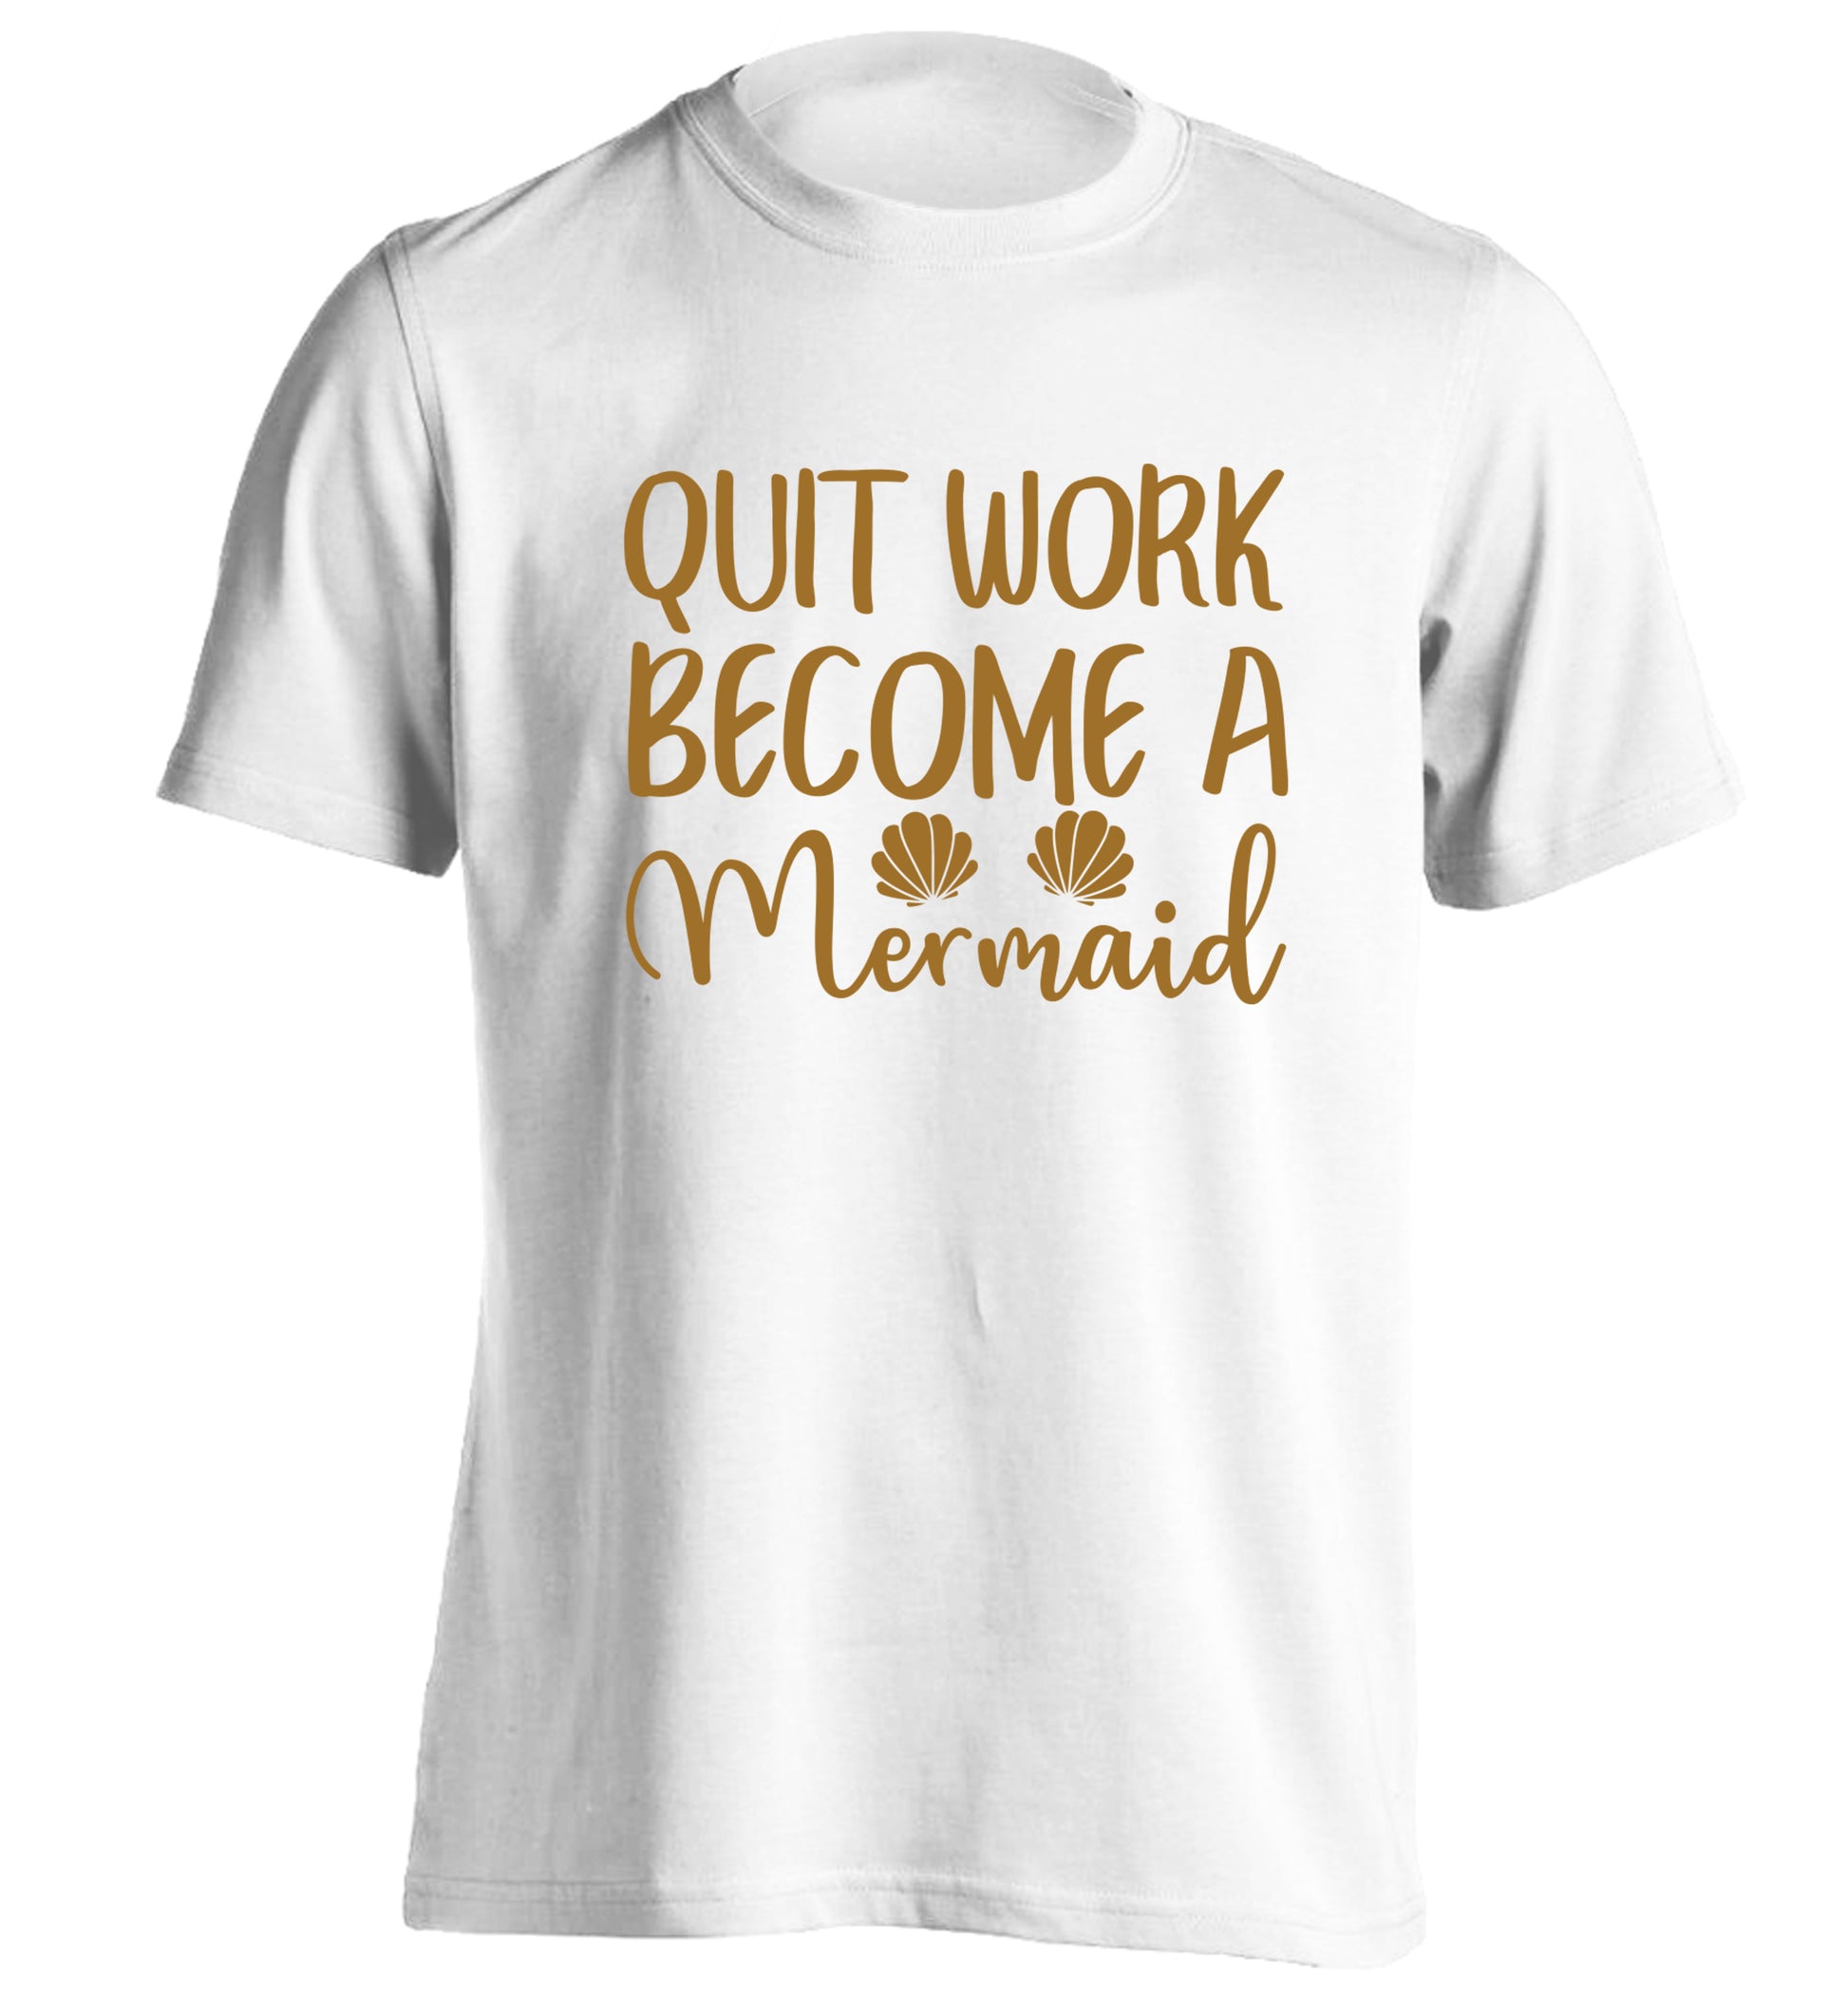 Quit work become a mermaid adults unisex white Tshirt 2XL